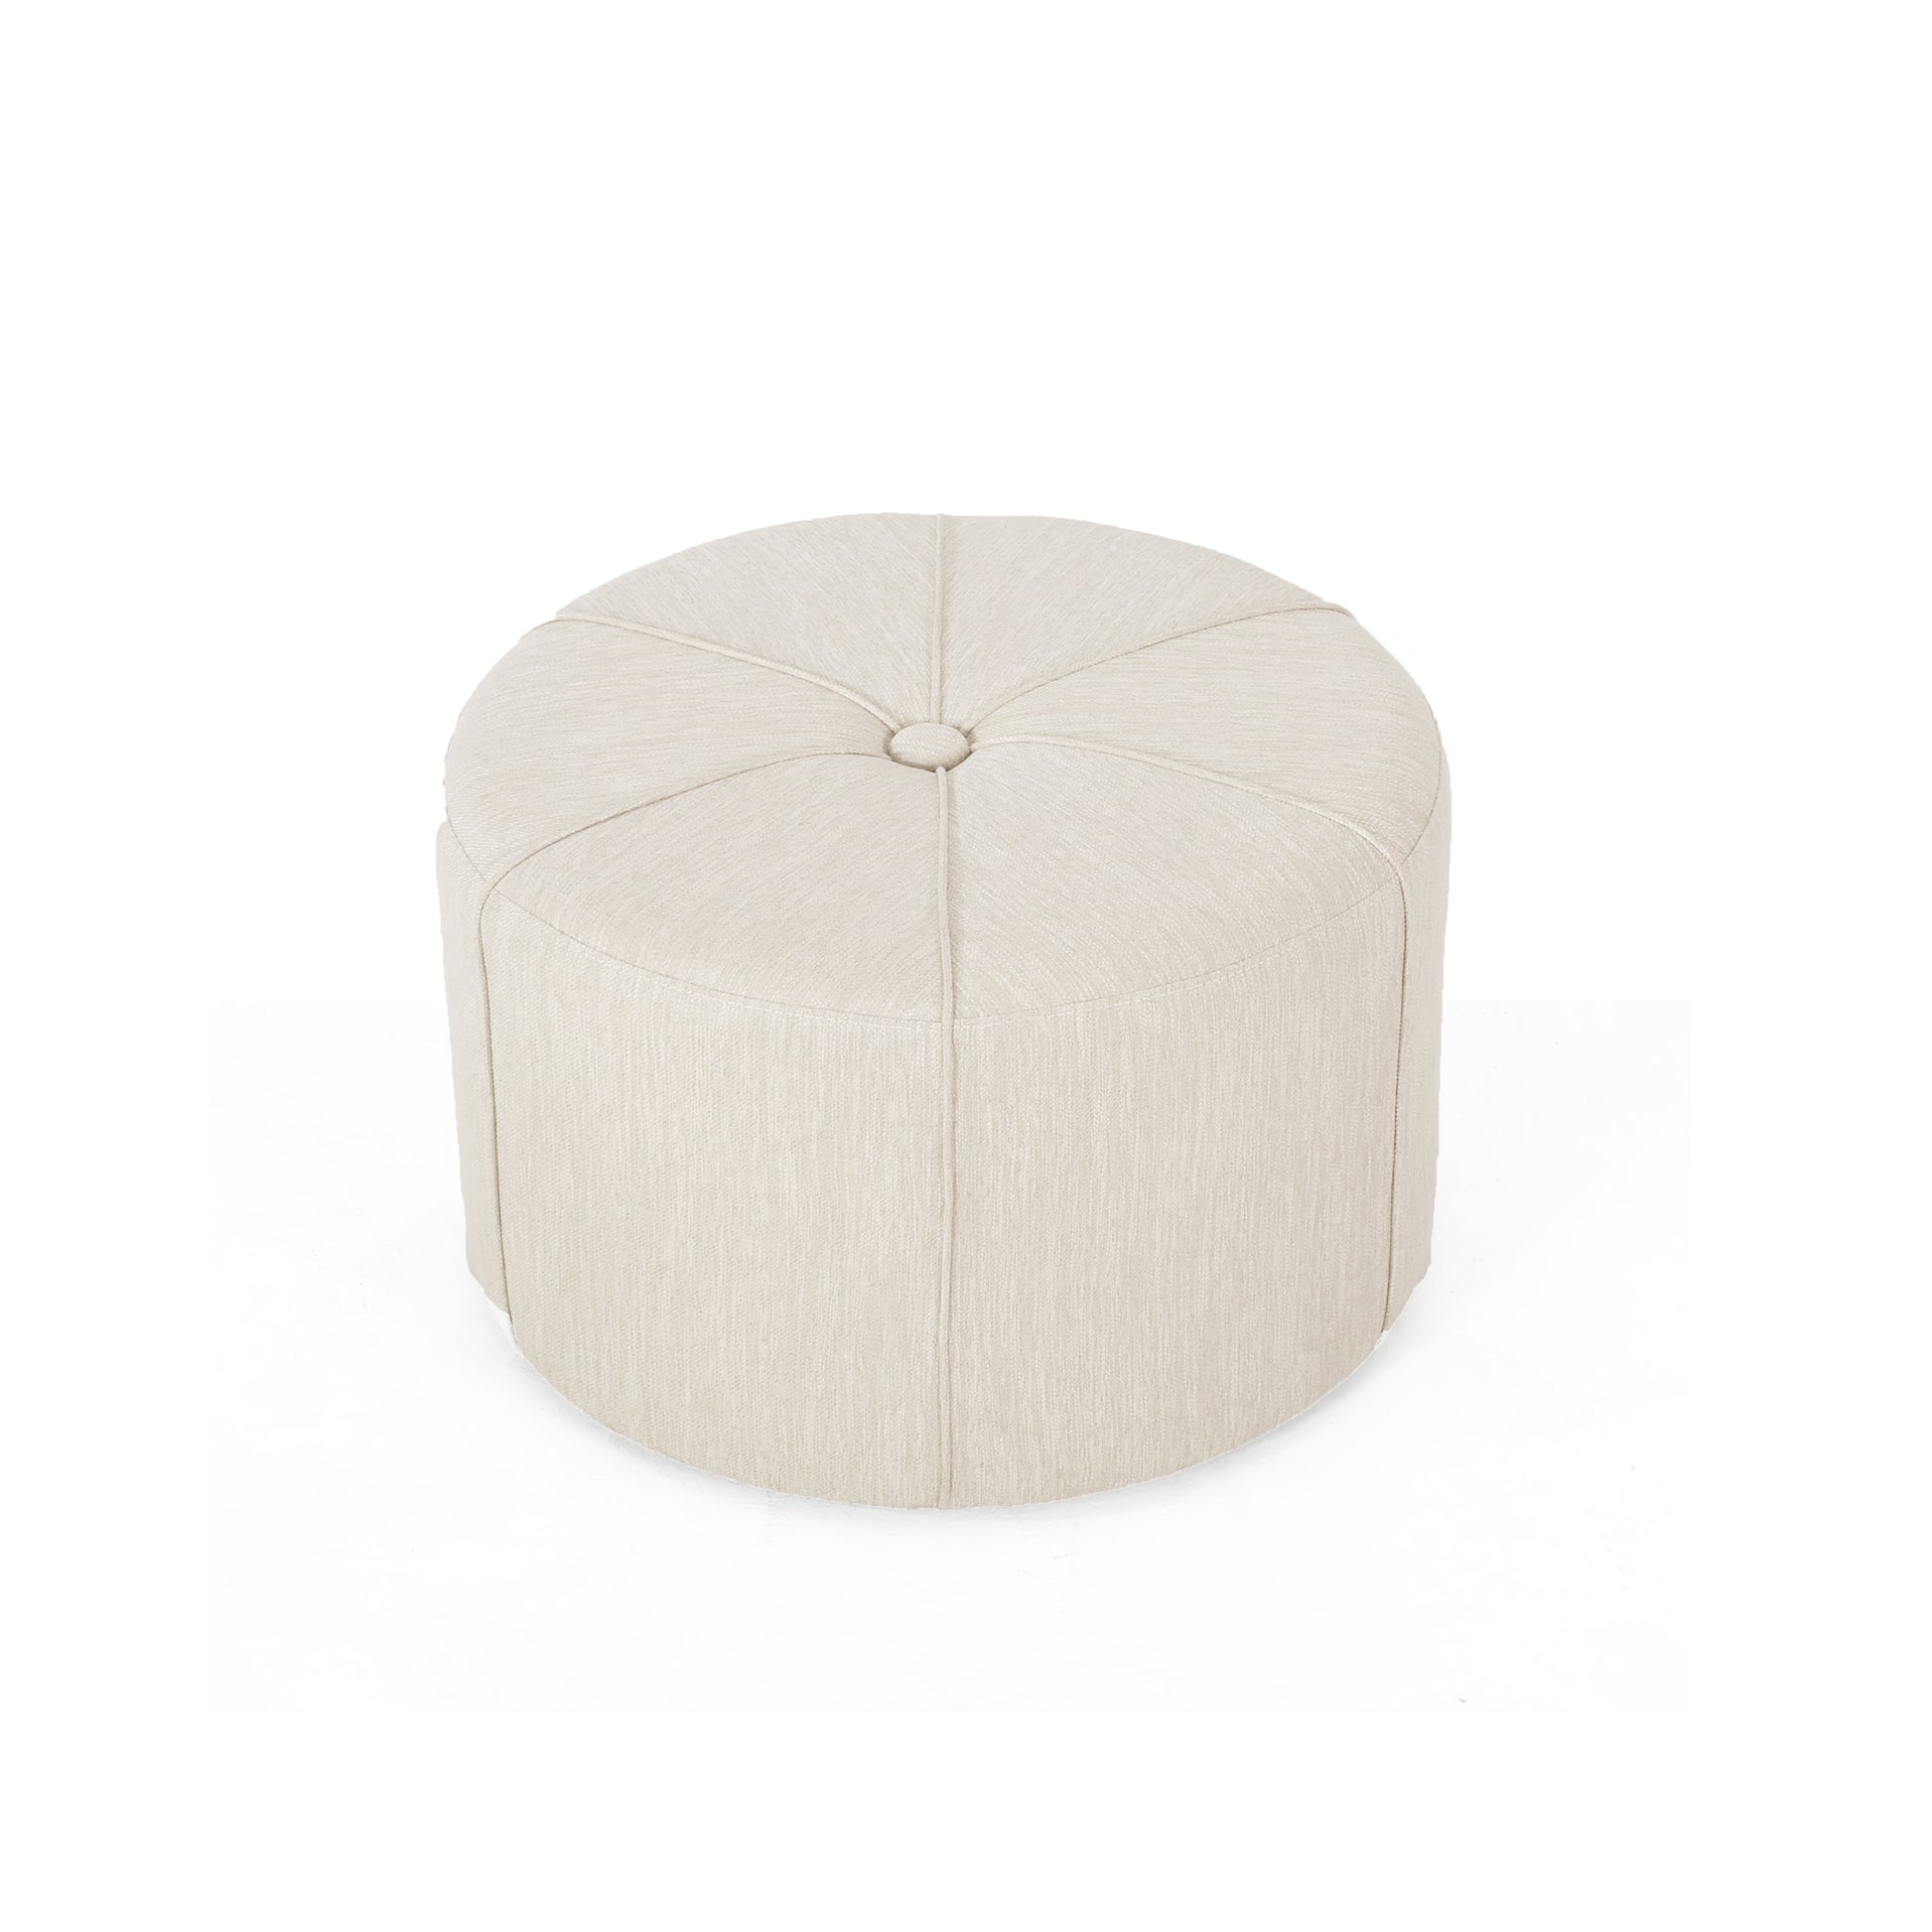 Cimarron Contemporary Round Ottoman With Rolling Casters